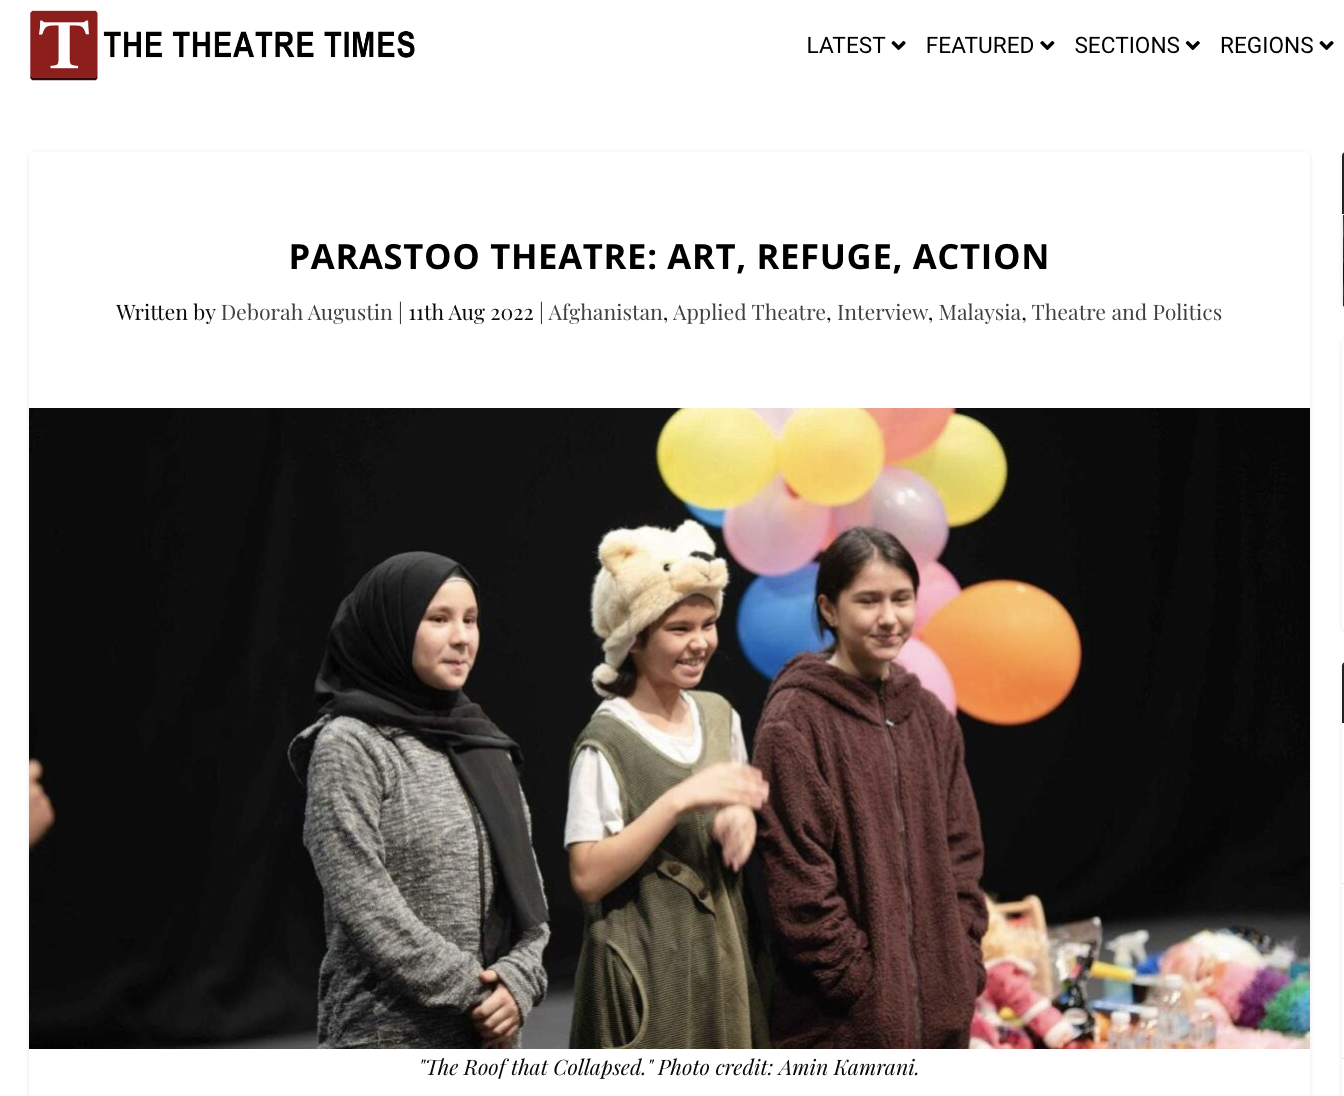 Parastoo Theater in The Theatre Times